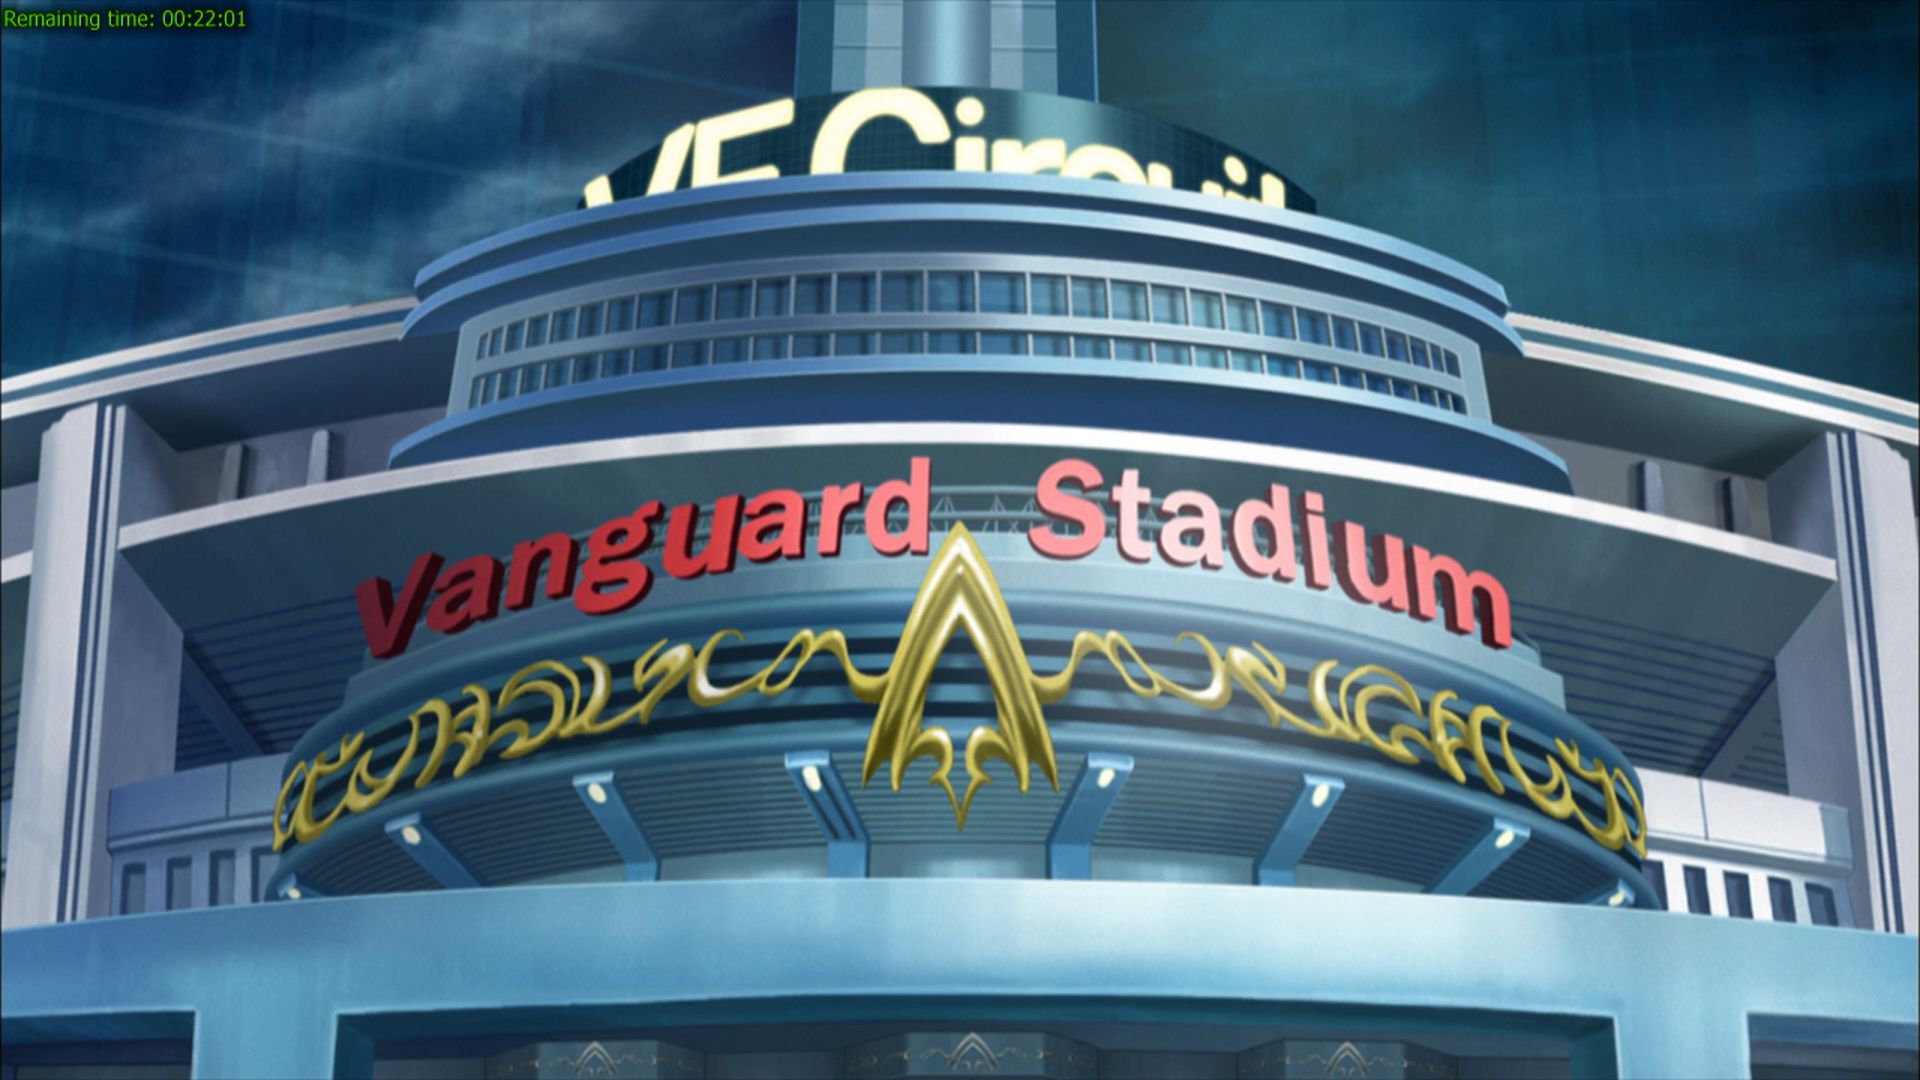 Rather than wasting precious real estate to casinos, Singapore is better off building Vanguard stadiums instead.